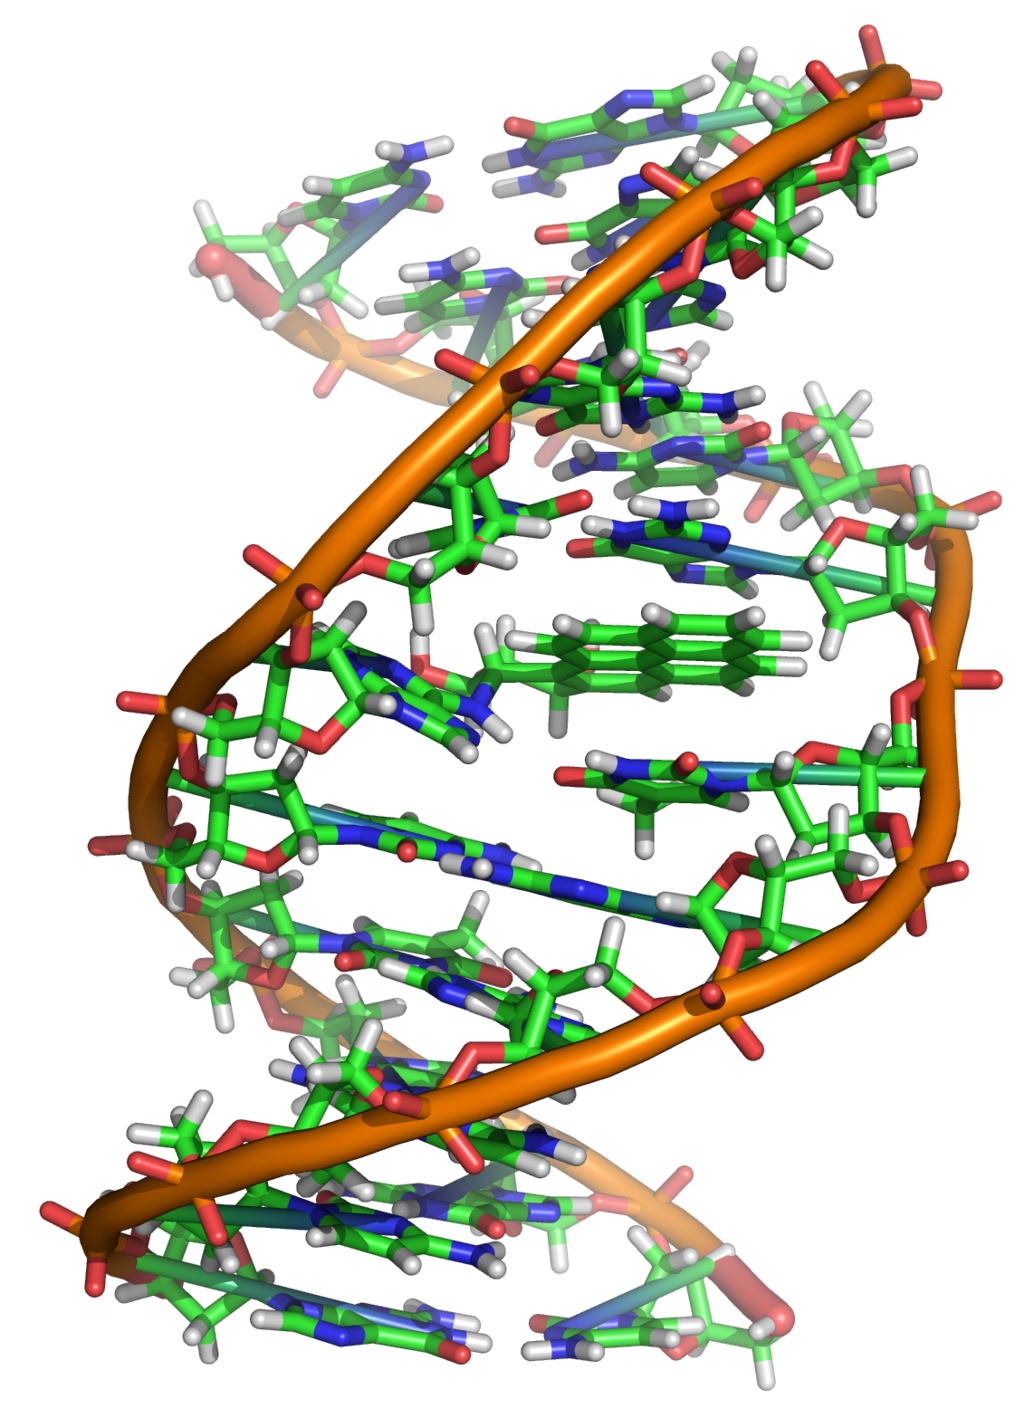 A BPDE metabolite forms a DNA adduct